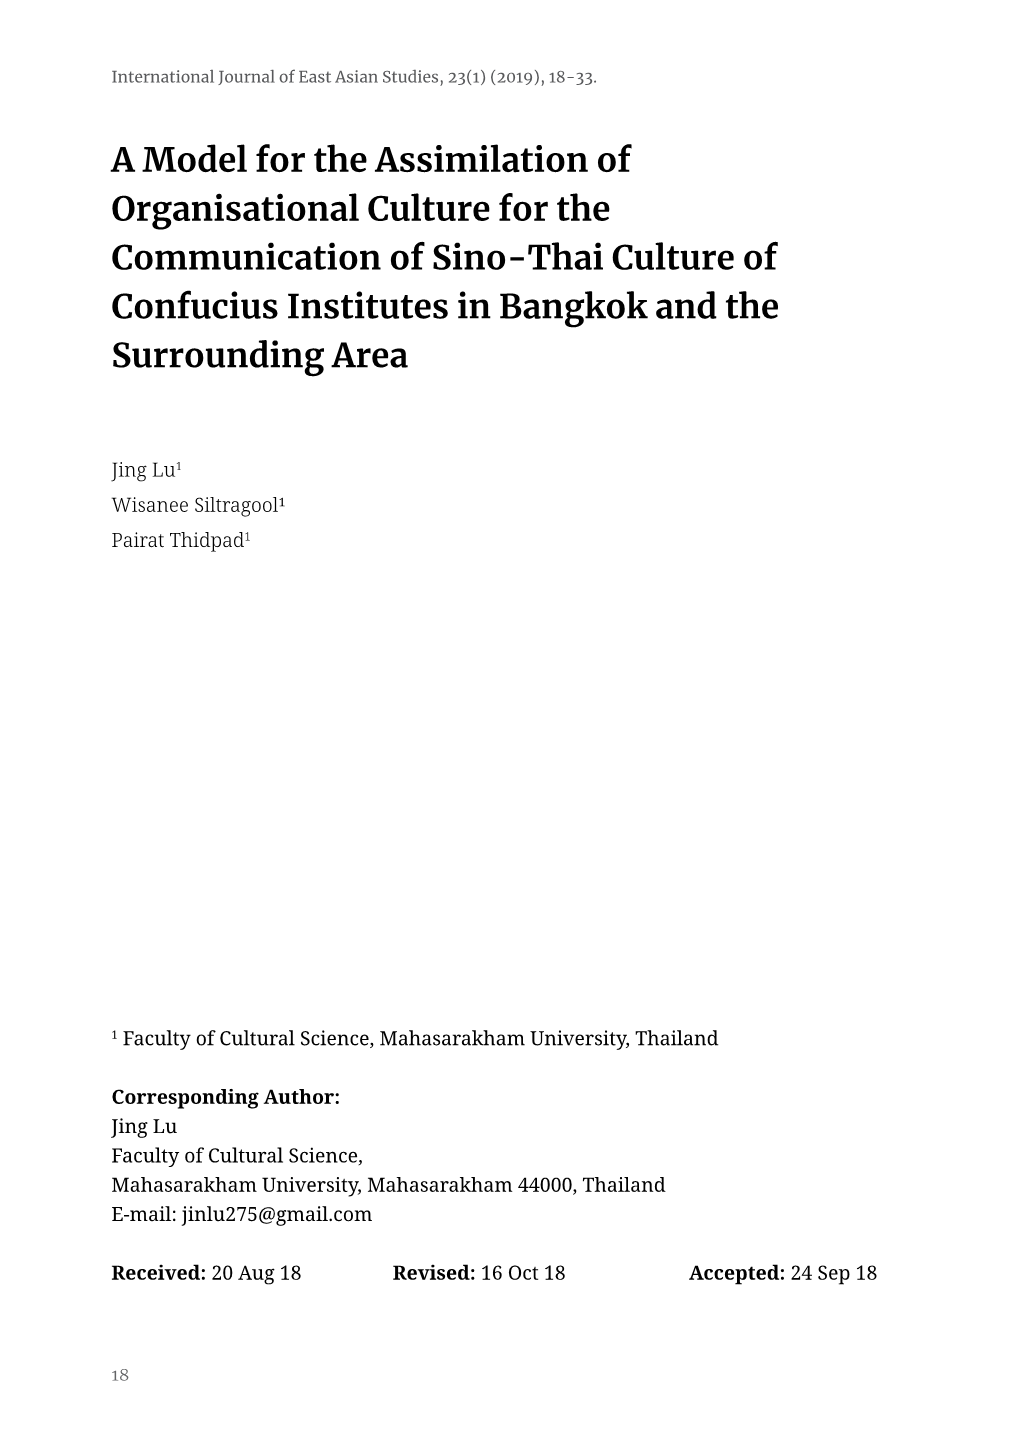 A Model for the Assimilation of Organisational Culture for the Communication of Sino-Thai Culture of Confucius Institutes in Bangkok and the Surrounding Area